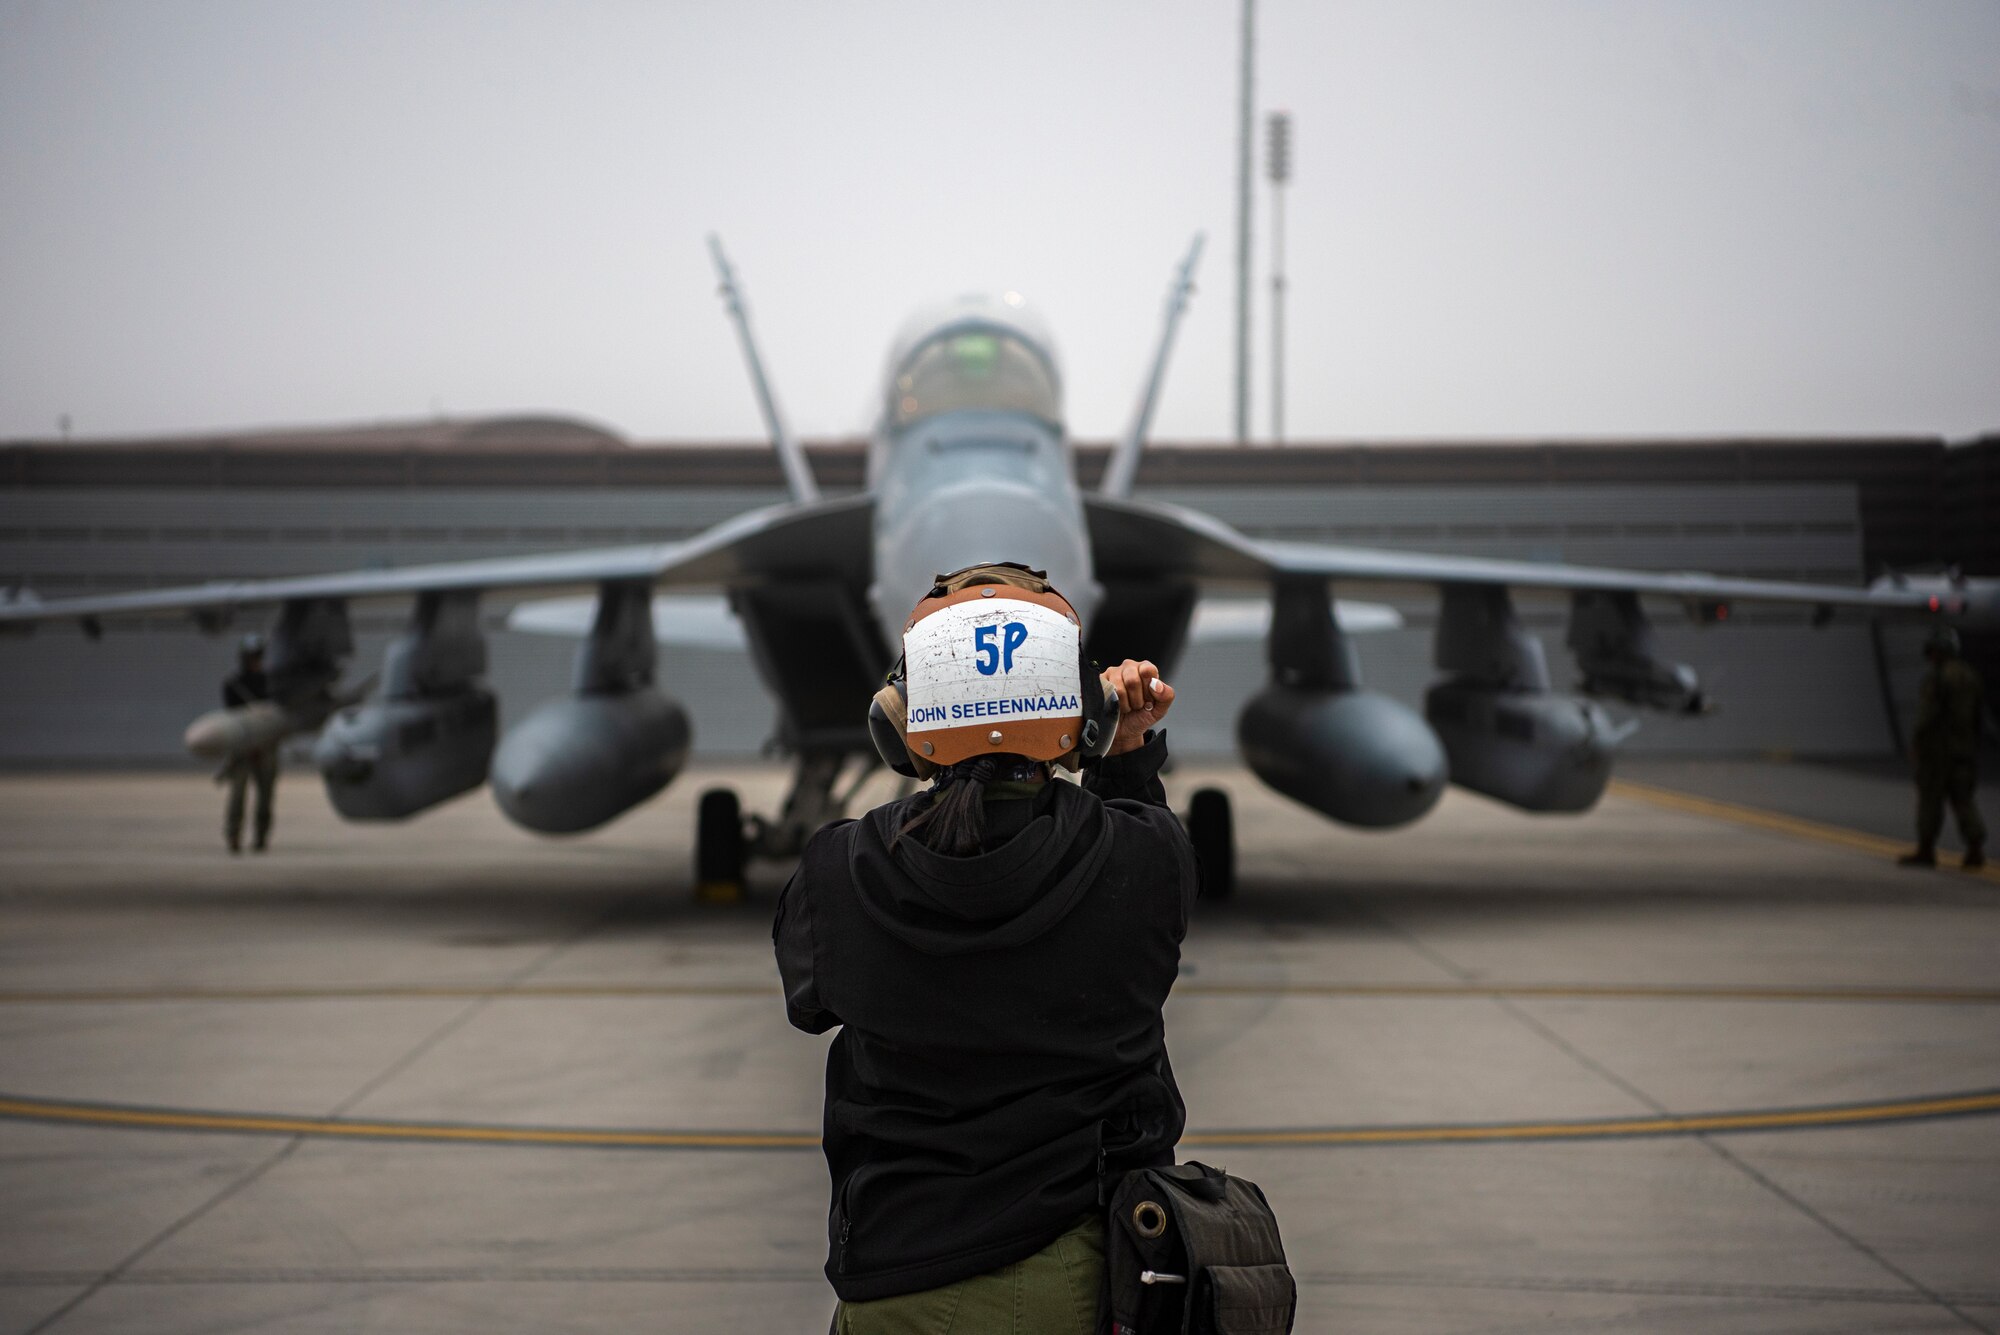 U.S. Navy Airman Seena Maharjan, plane captain assigned to Electronic Attack Squadron 131 at Naval Air Station Whidbey Island, Washington, signals an EA-18G Growler prior to flying sortie during Vigilant Storm 23 at Osan Air Base, Republic of Korea, Nov. 1, 2022.